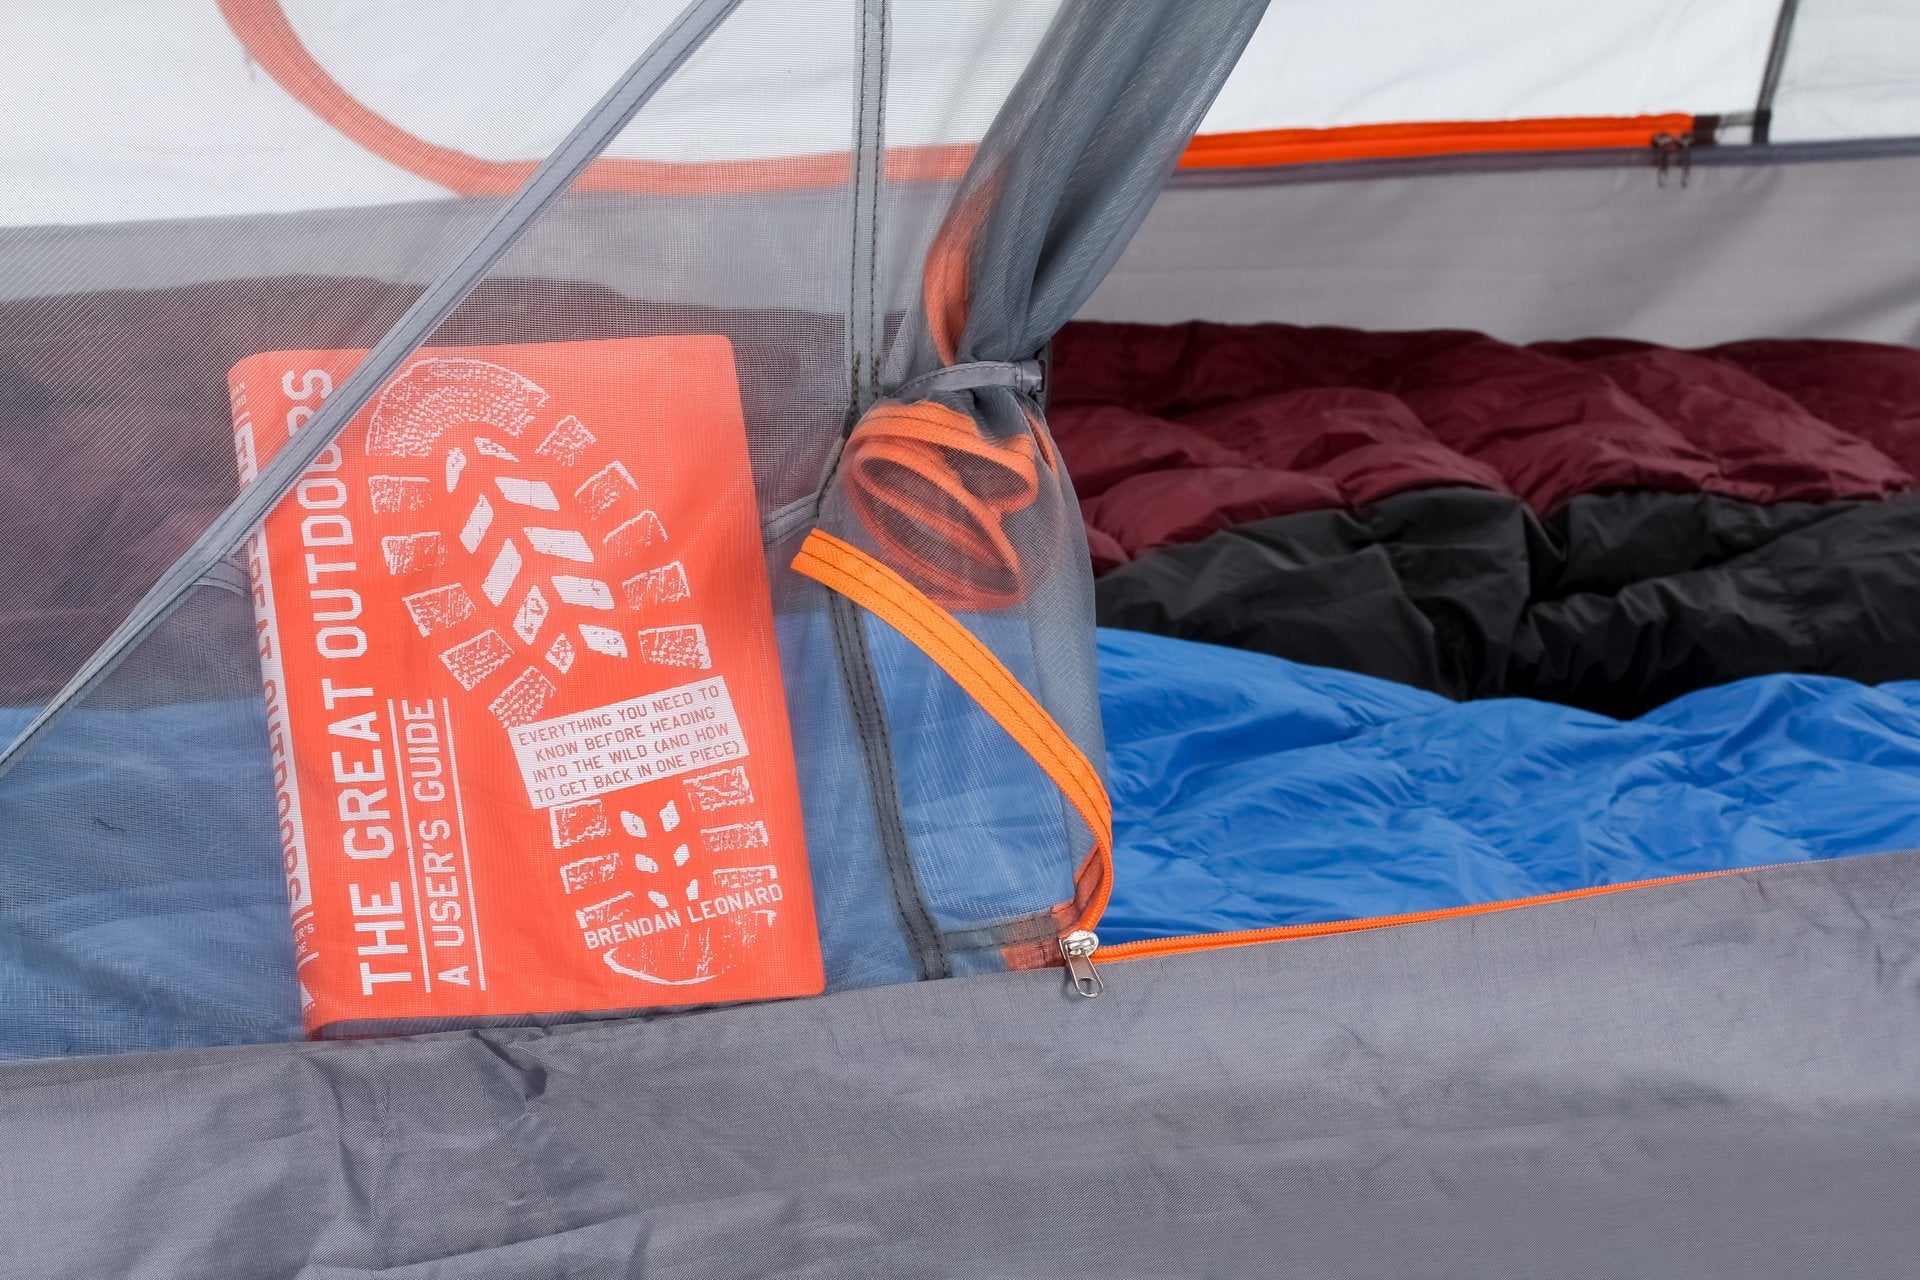 Featherstone |  UL Granite 2P Backpacking Tent, Tents, Featherstone, Defiance Outdoor Gear Co.